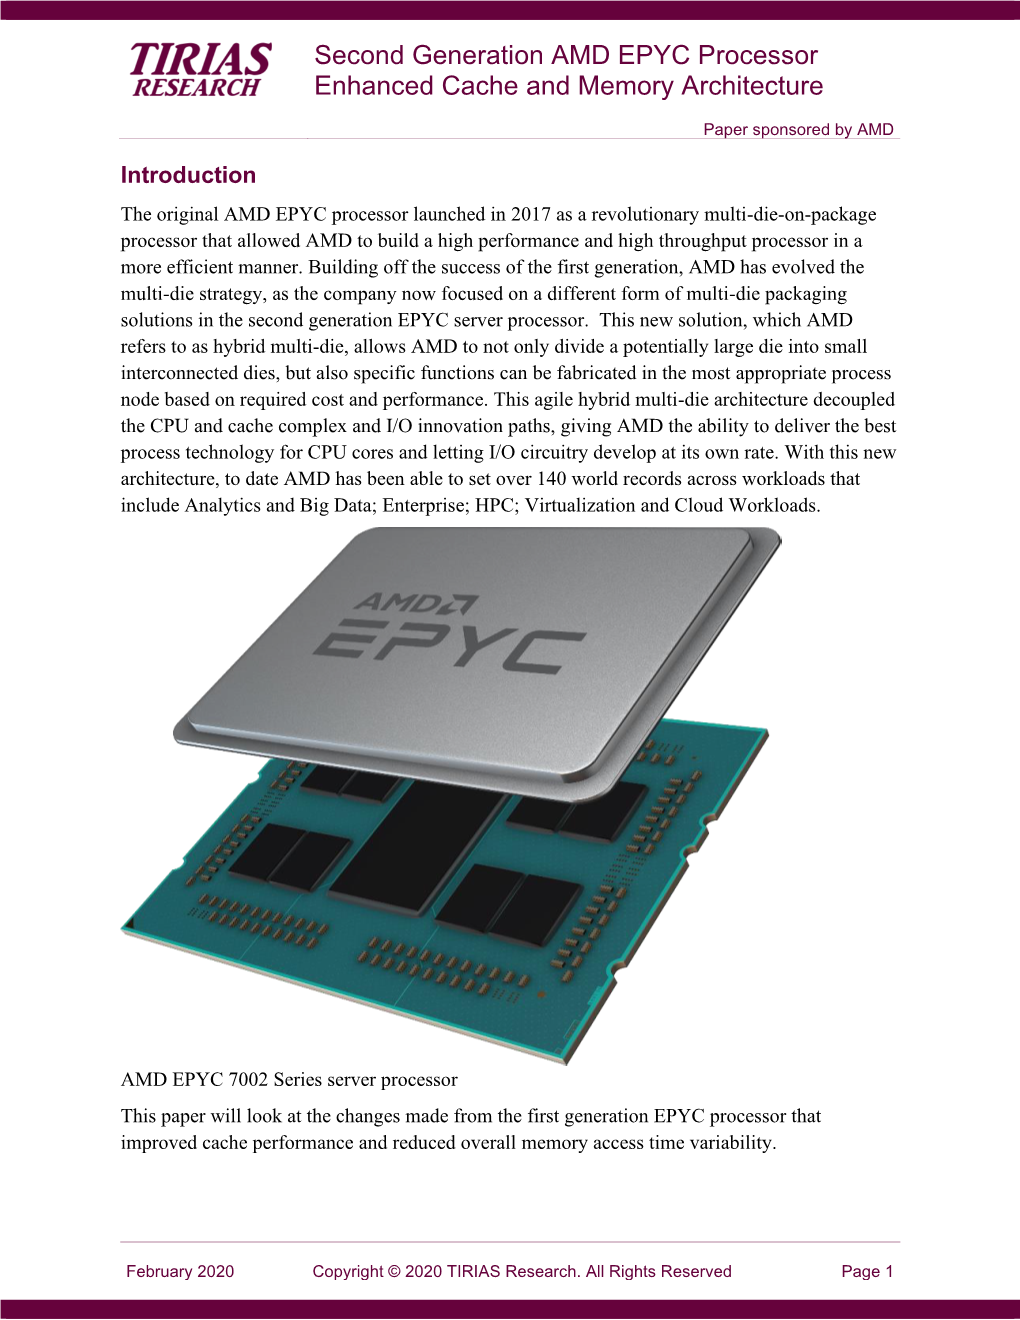 Second Generation AMD EPYC Processor Enhanced Cache and Memory Architecture